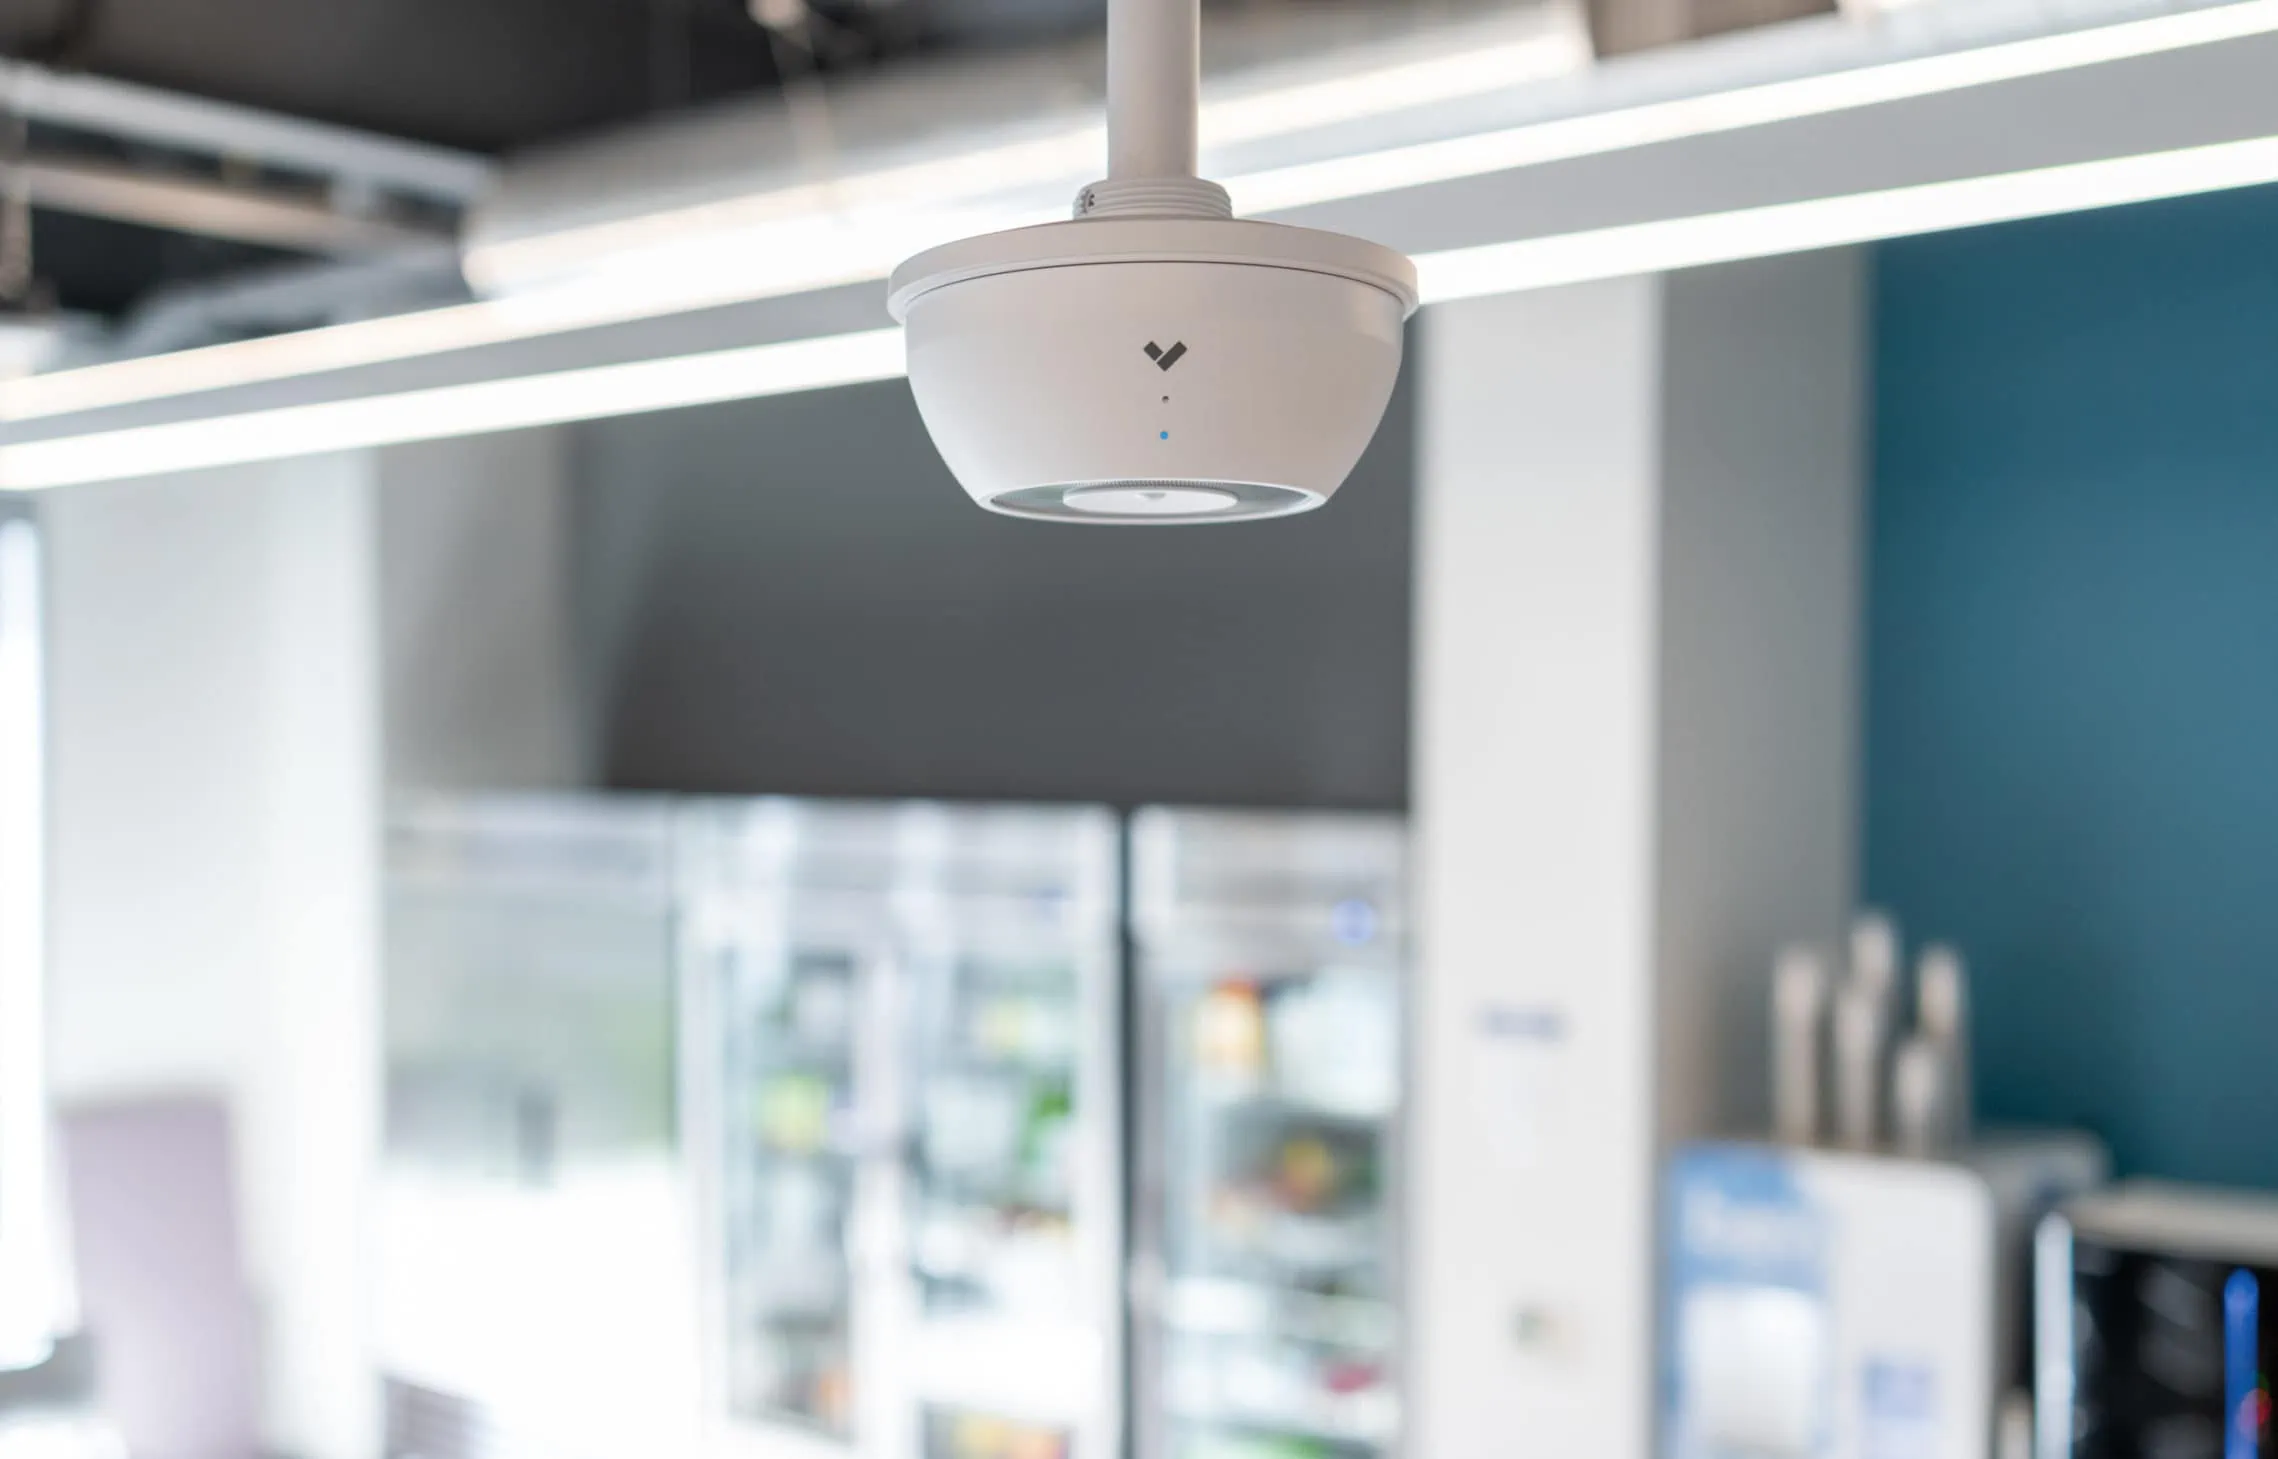 The highly-rated and -reviewed SV11 Environmental Sensor mounted on the ceiling of a small business 